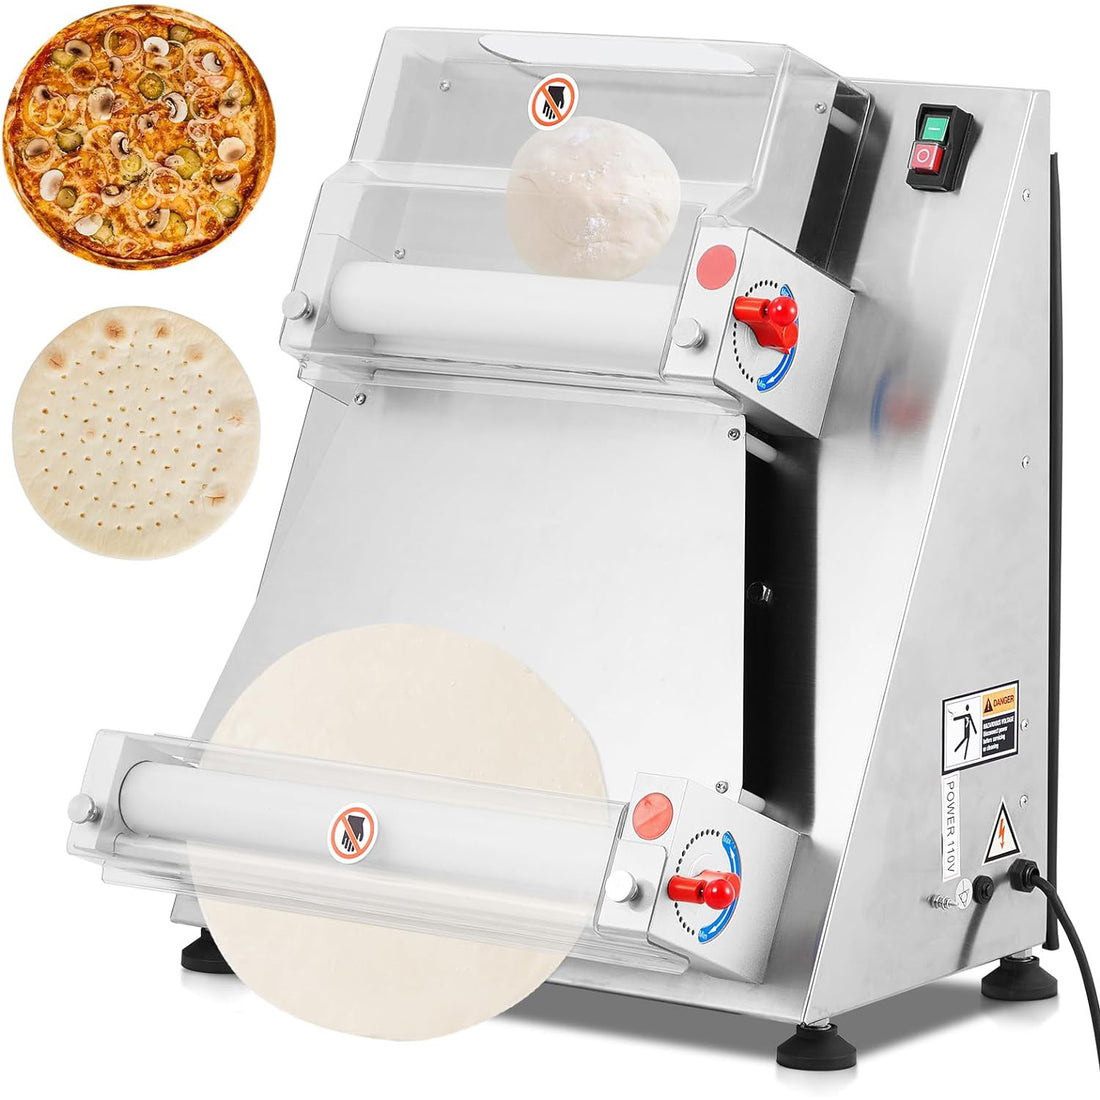 16" Automatic Pizza Dough Roller 370W for Noodle & Bread